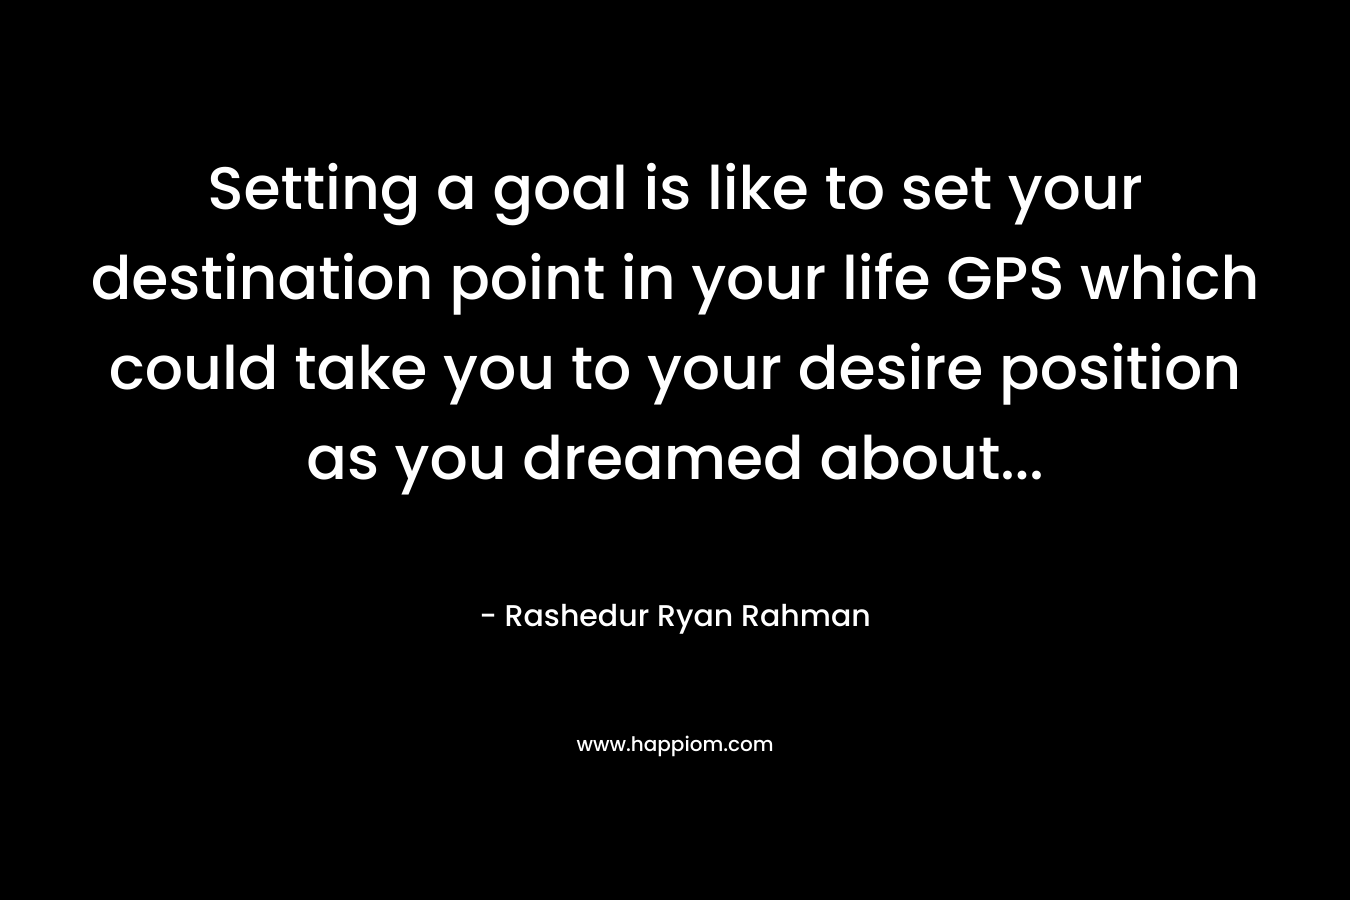 Setting a goal is like to set your destination point in your life GPS which could take you to your desire position as you dreamed about...